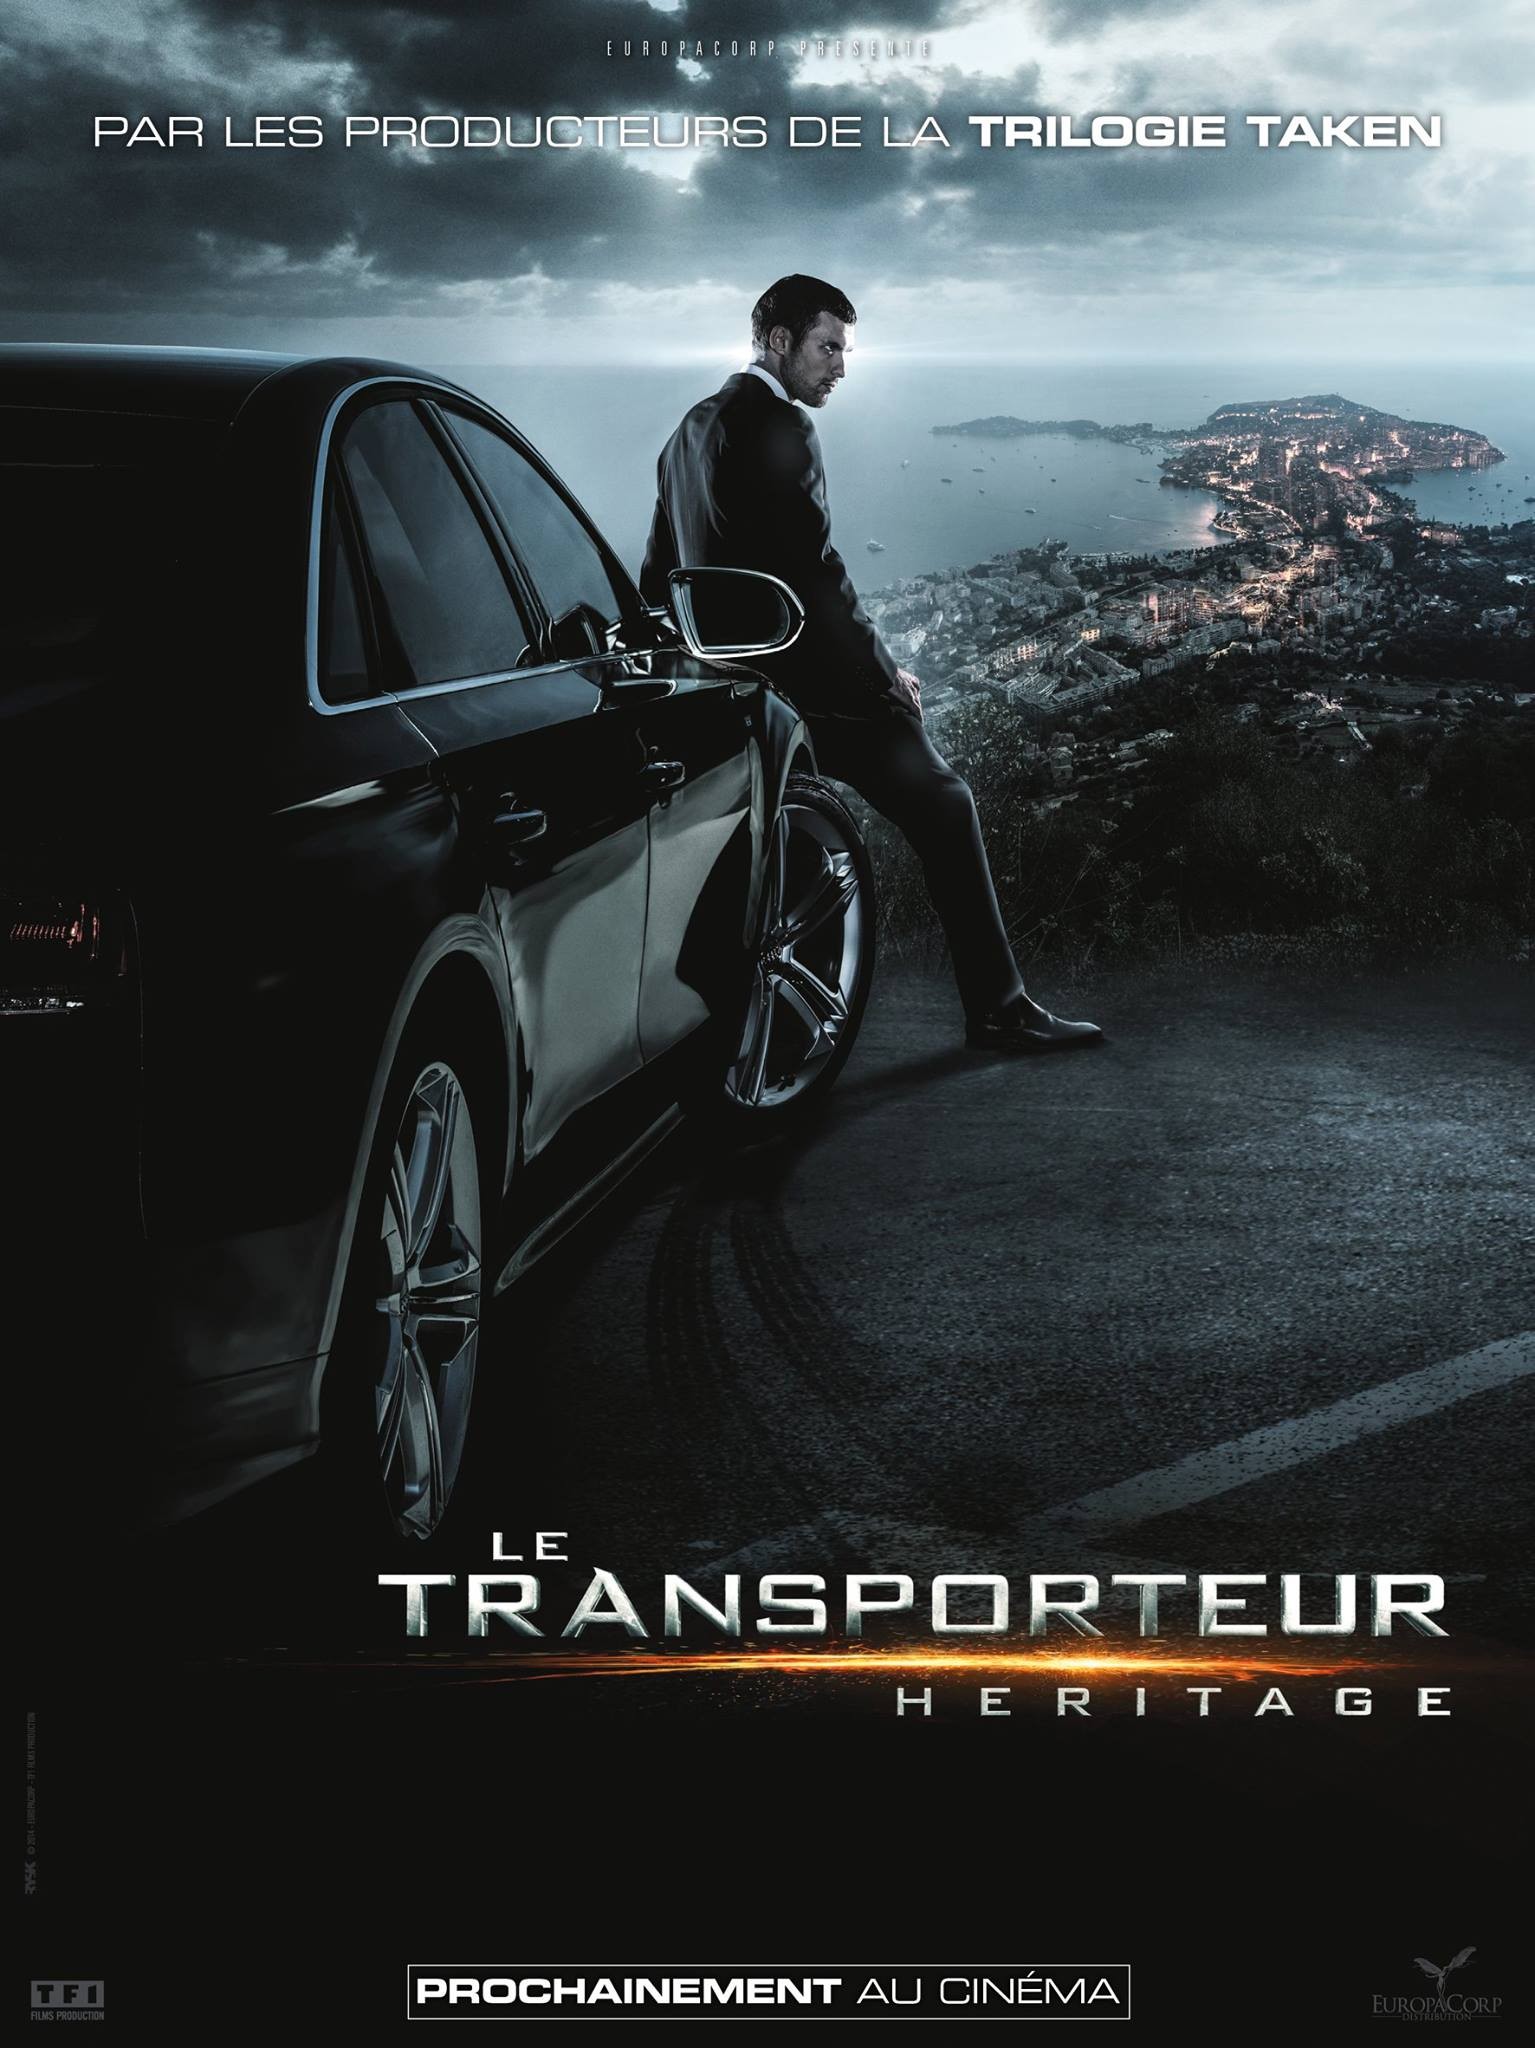 The Transporter Refueled Movie Poster